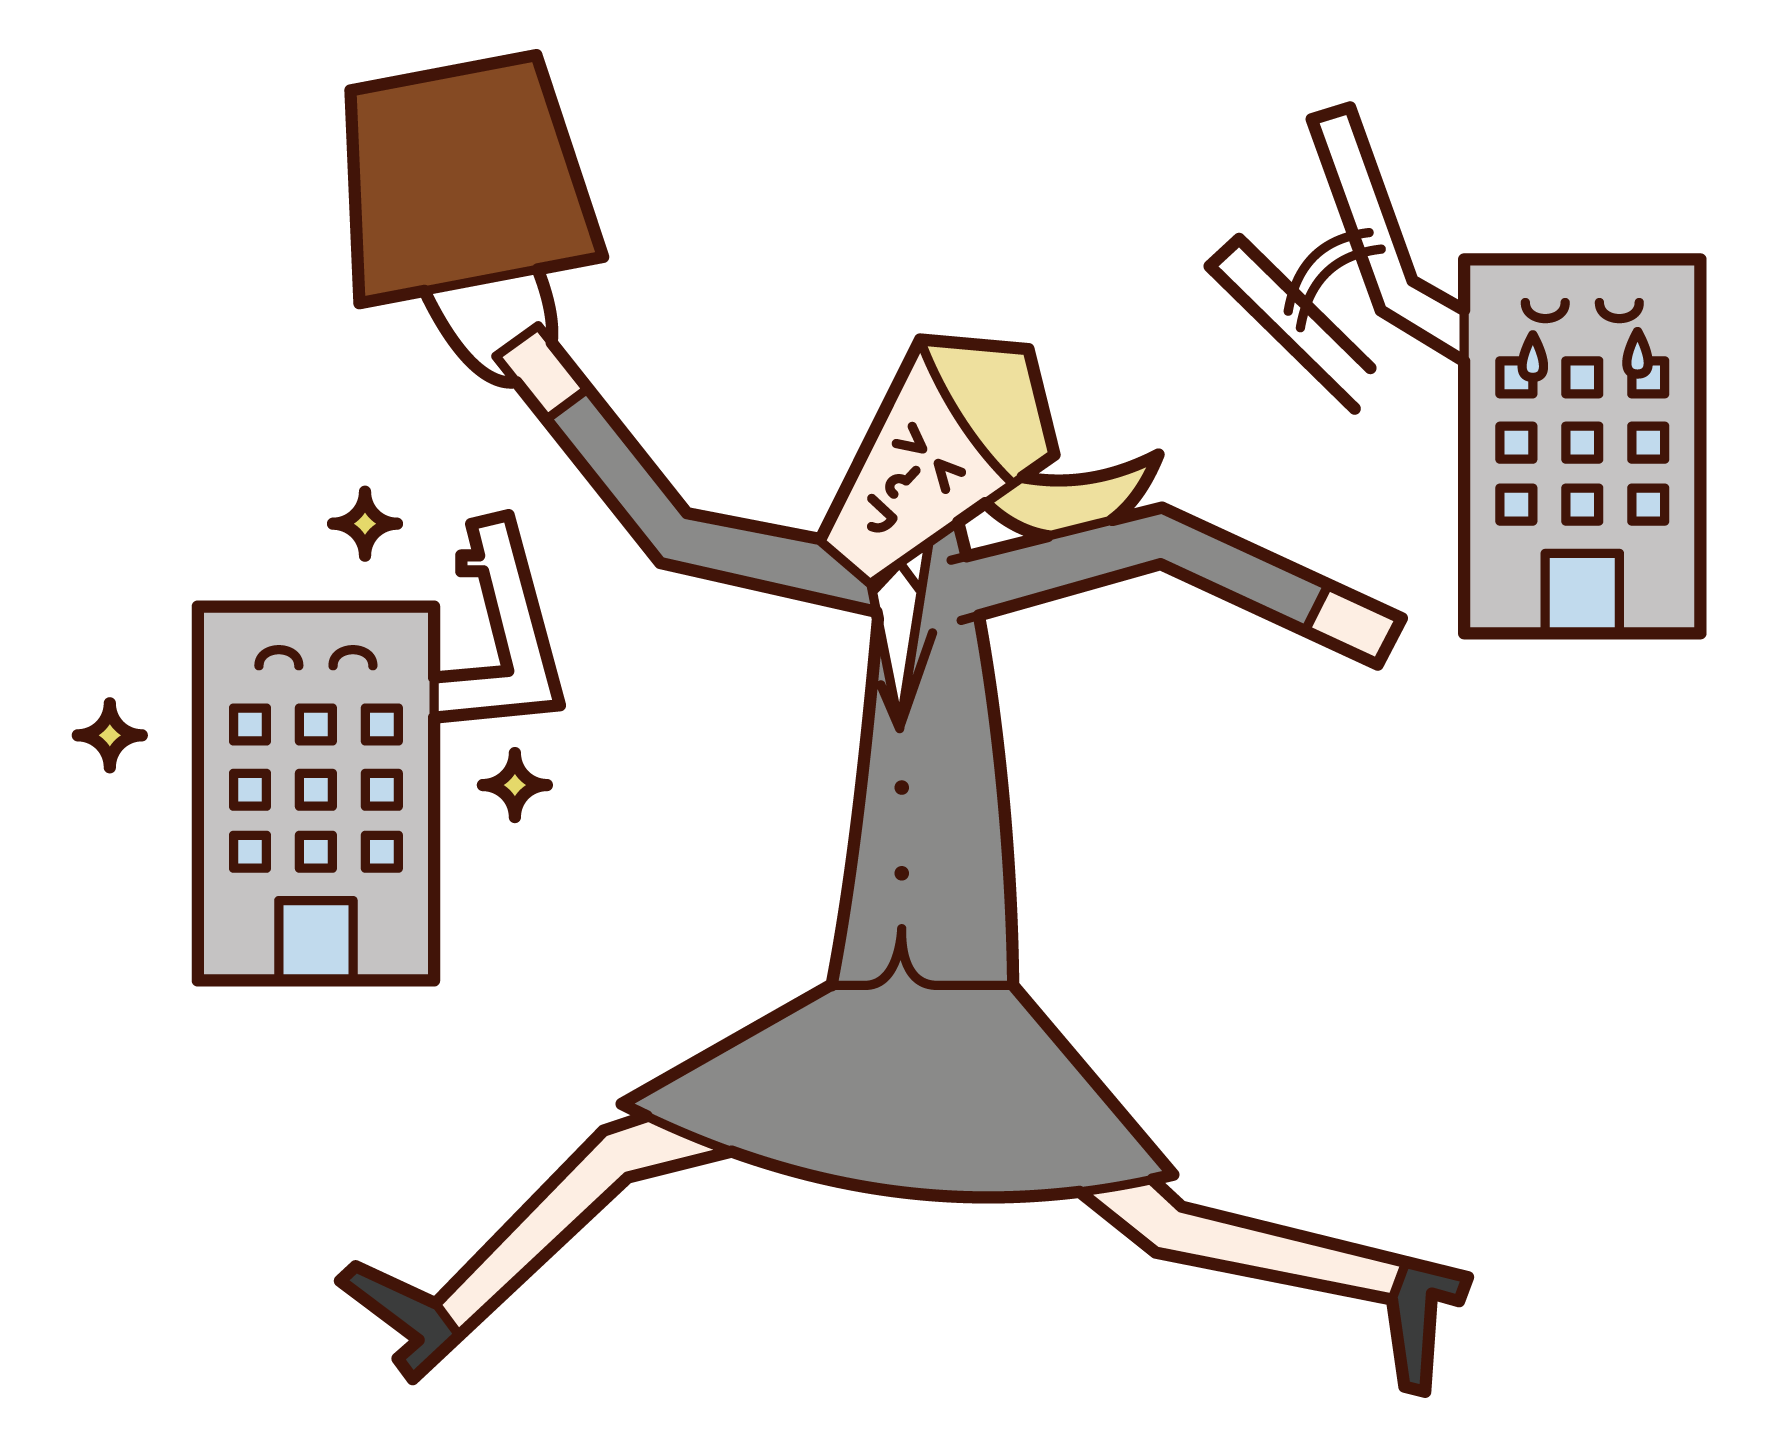 Illustration of a woman who changes jobs